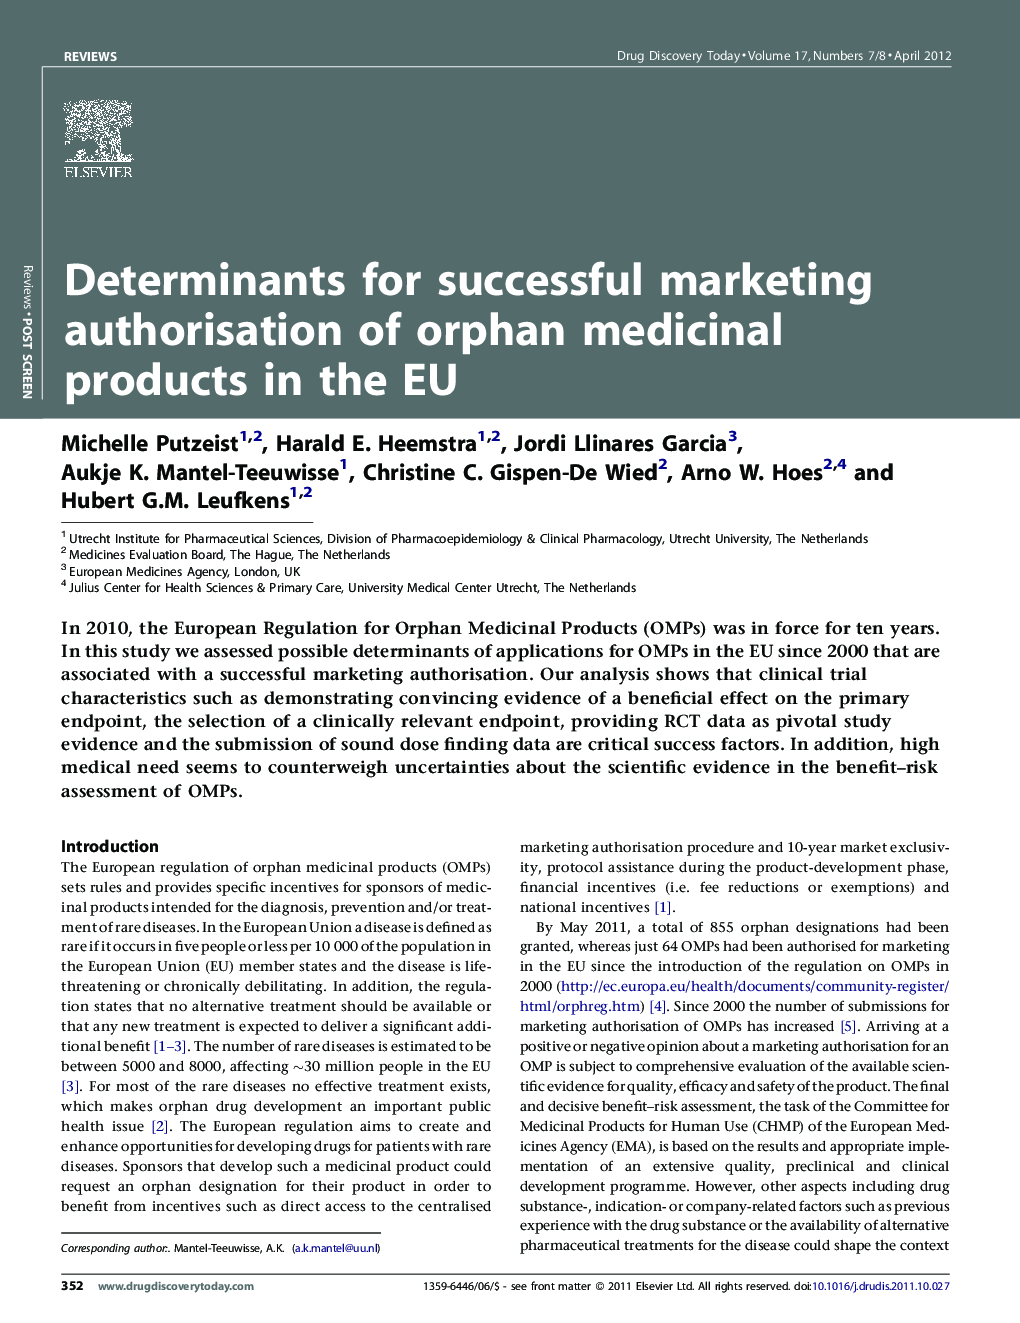 Determinants for successful marketing authorisation of orphan medicinal products in the EU